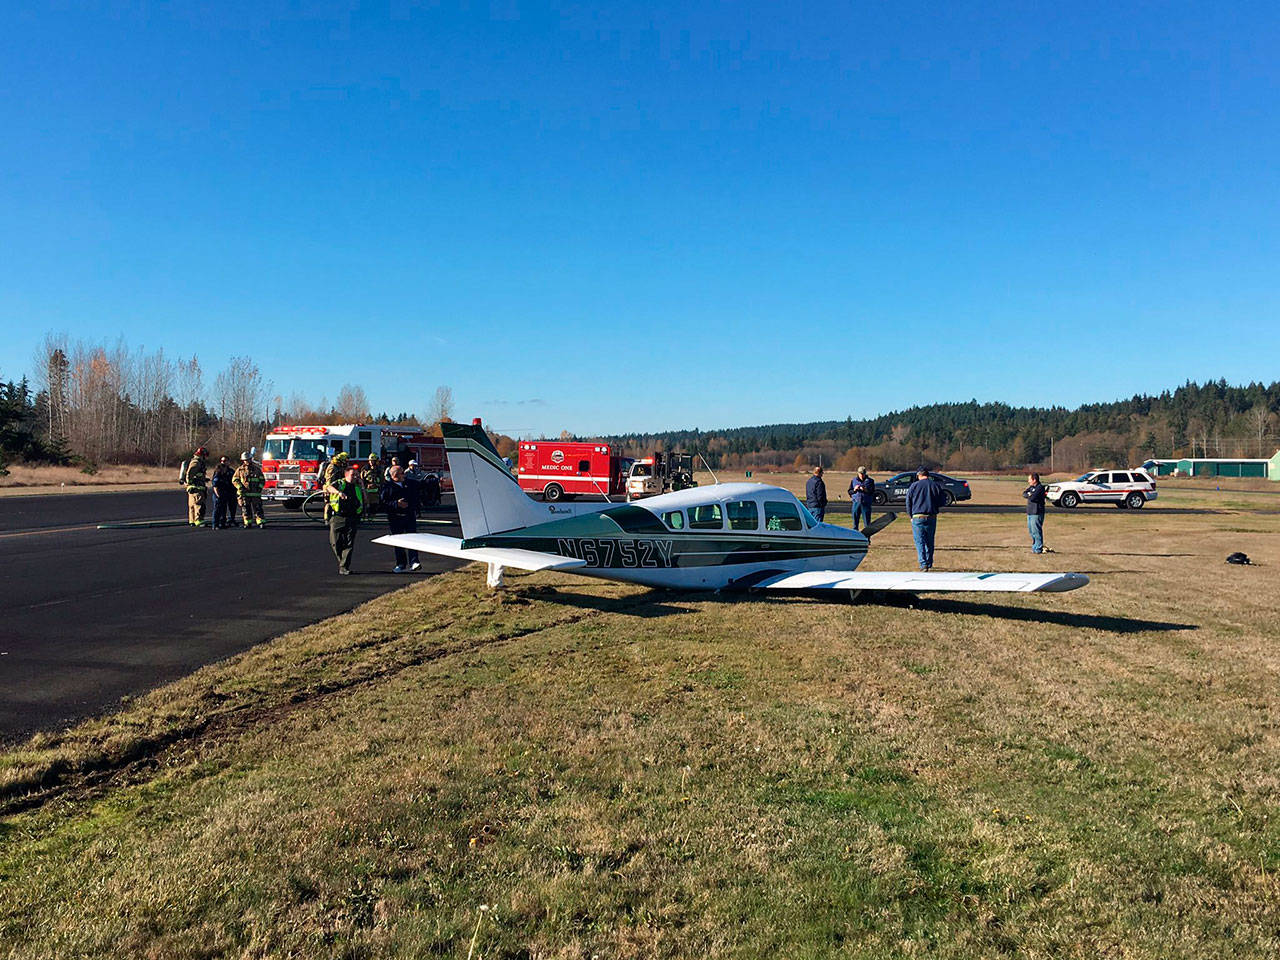 A fixed-wing aircraft crash-landed at Jefferson County International Airport after its landing gear apparently failed to deploy Sunday. (Bill Beezley/East Jefferson Fire Rescue)